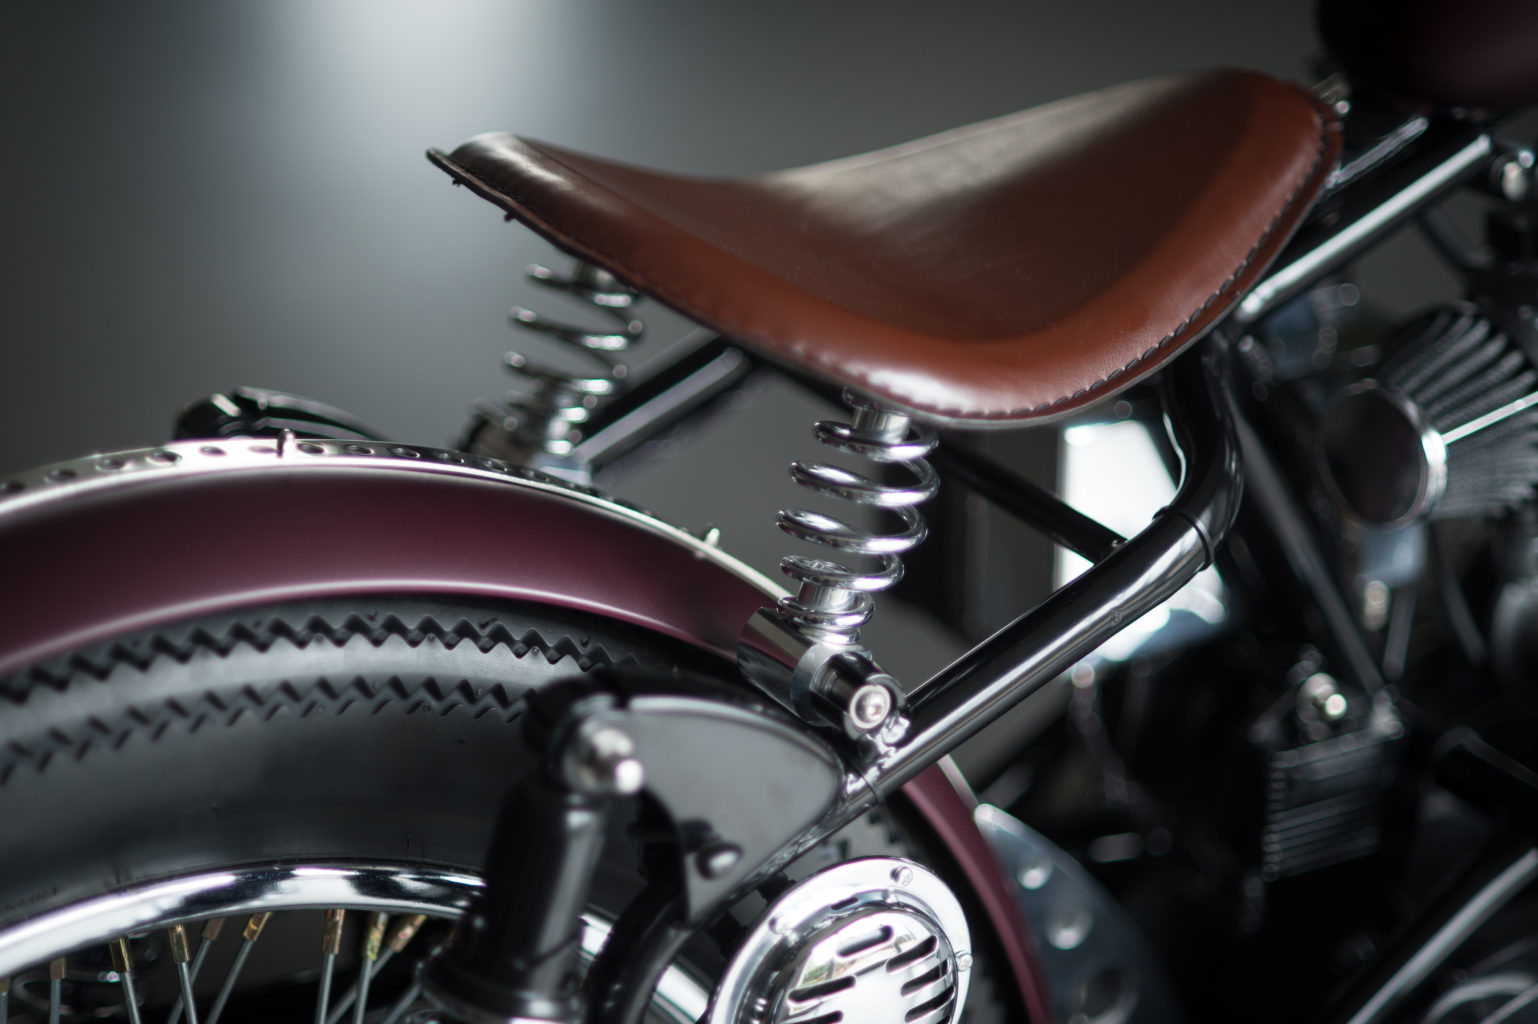 Royal Enfield Bullet by Watchmaker Motorcycle